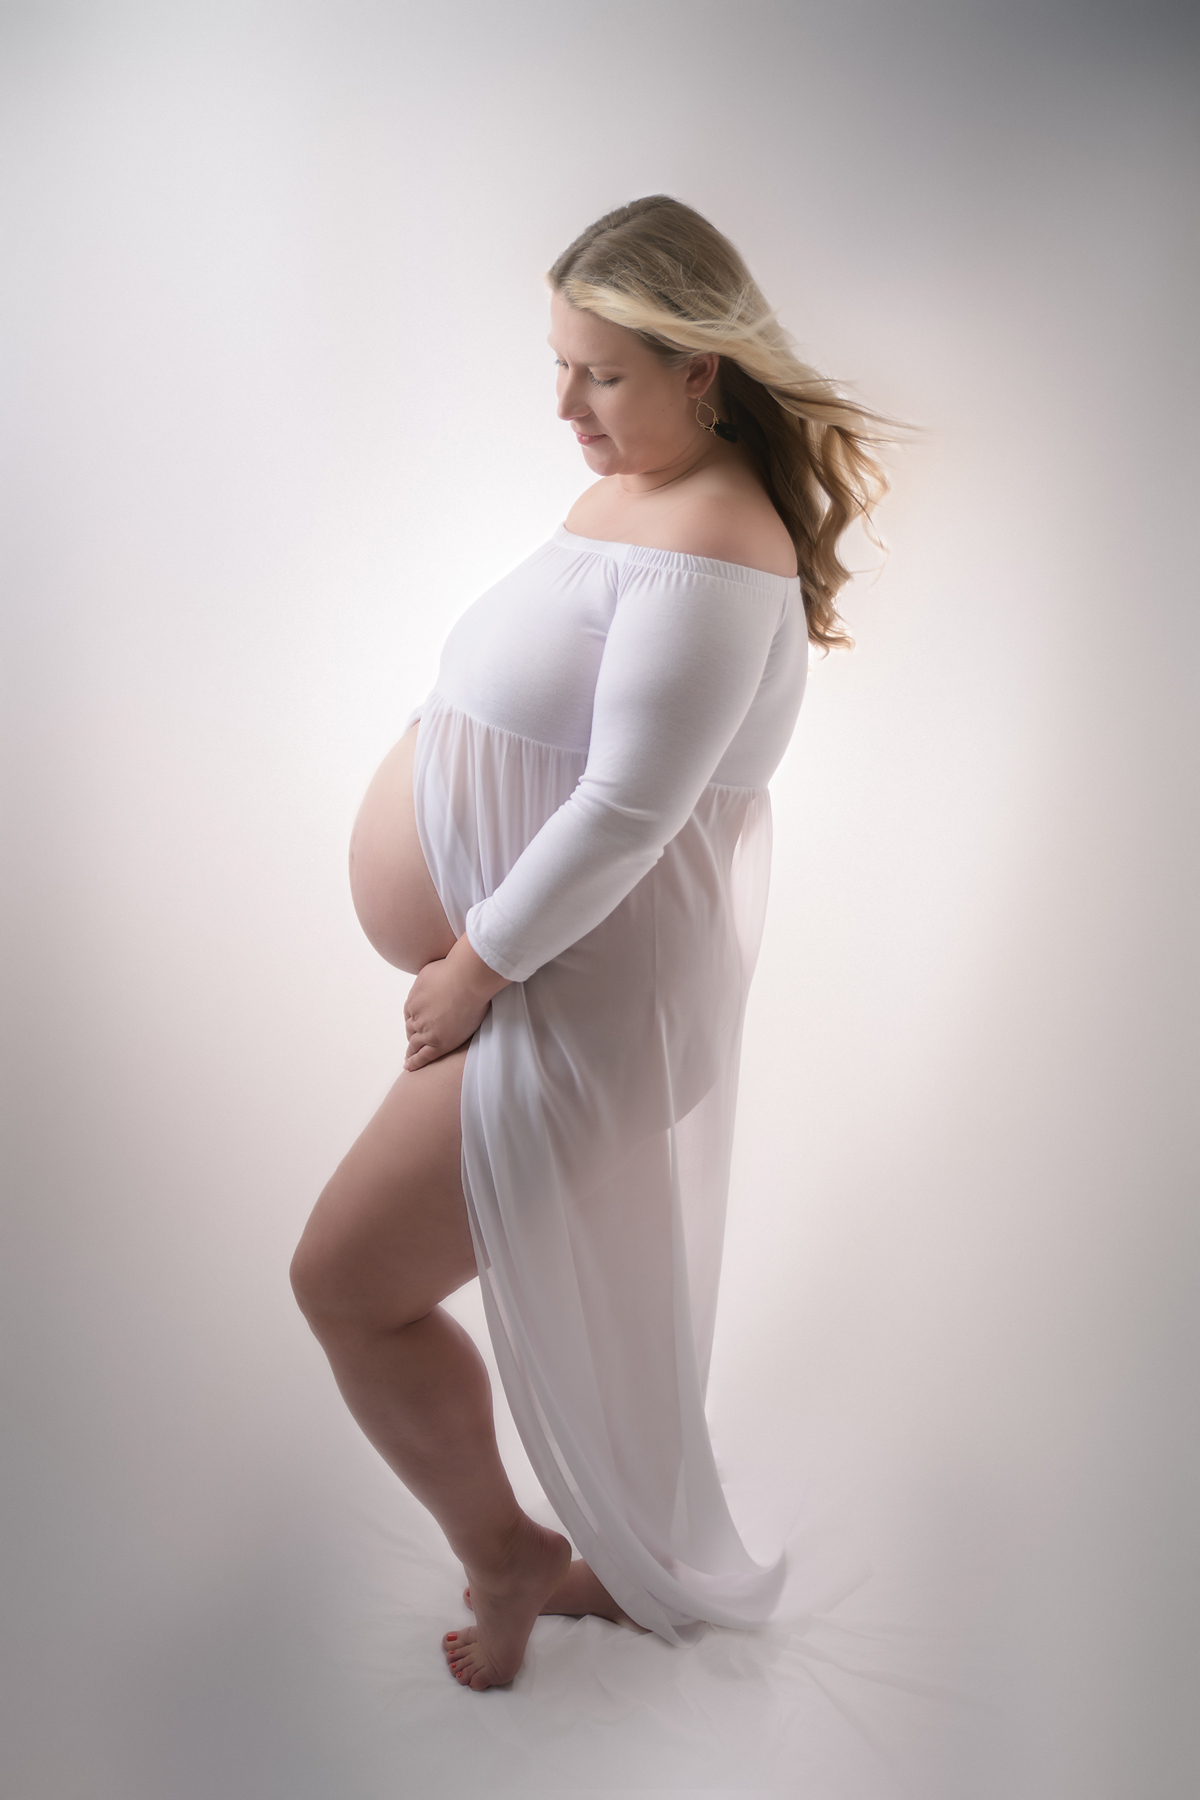 Maternity by Lisa Rowland in Studio